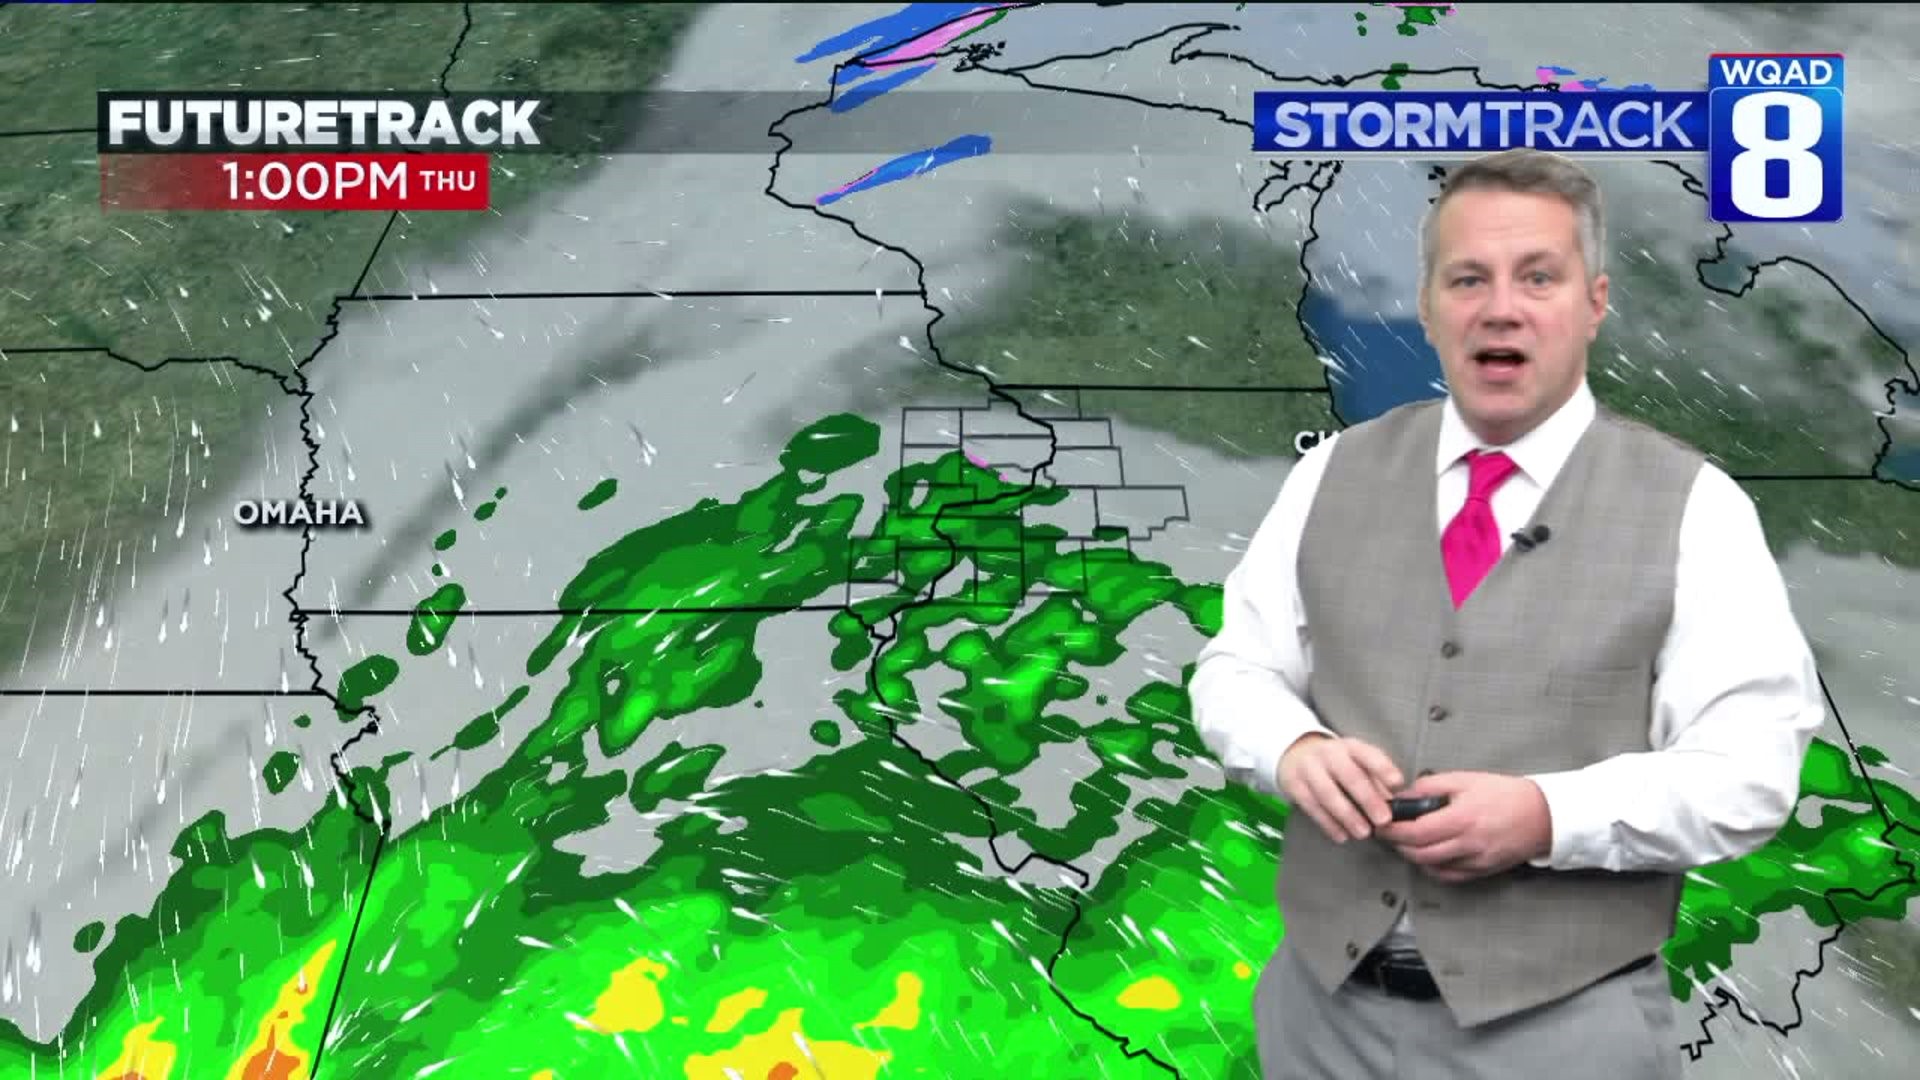 Eric is tracking rain for the QCA today